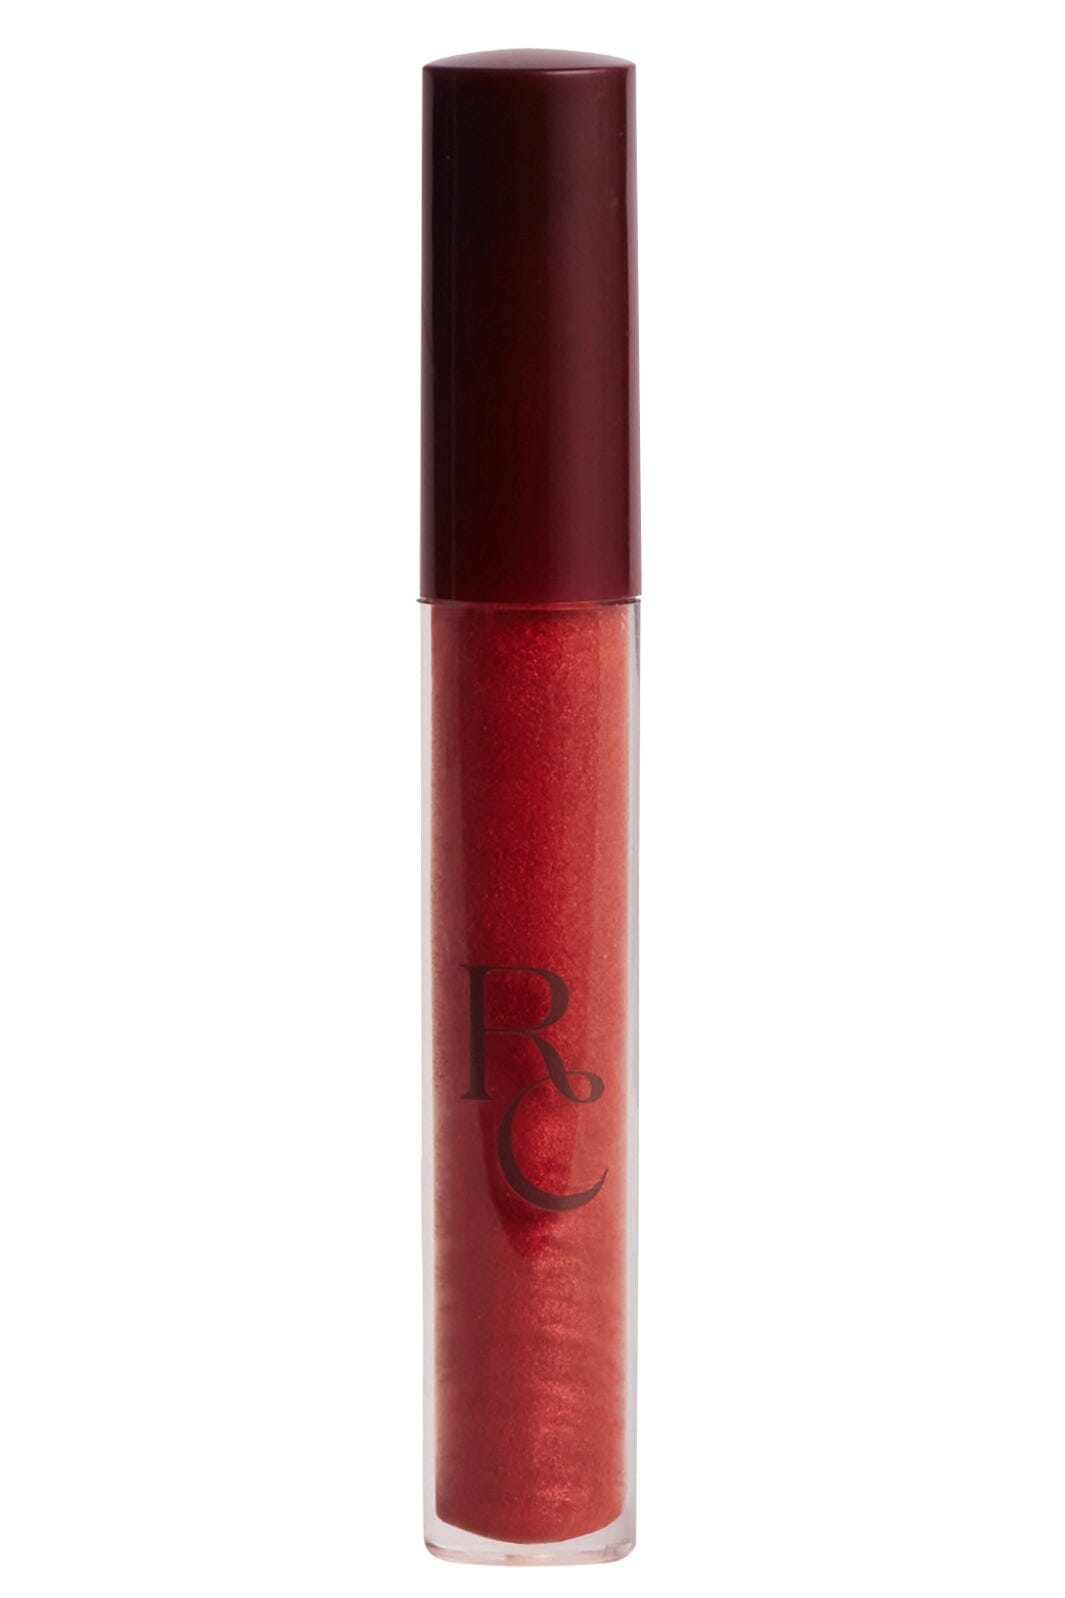 Rudolph Care - Lips By Rudolph Care - Andrea (02)Andrea (02) Lipgloss 